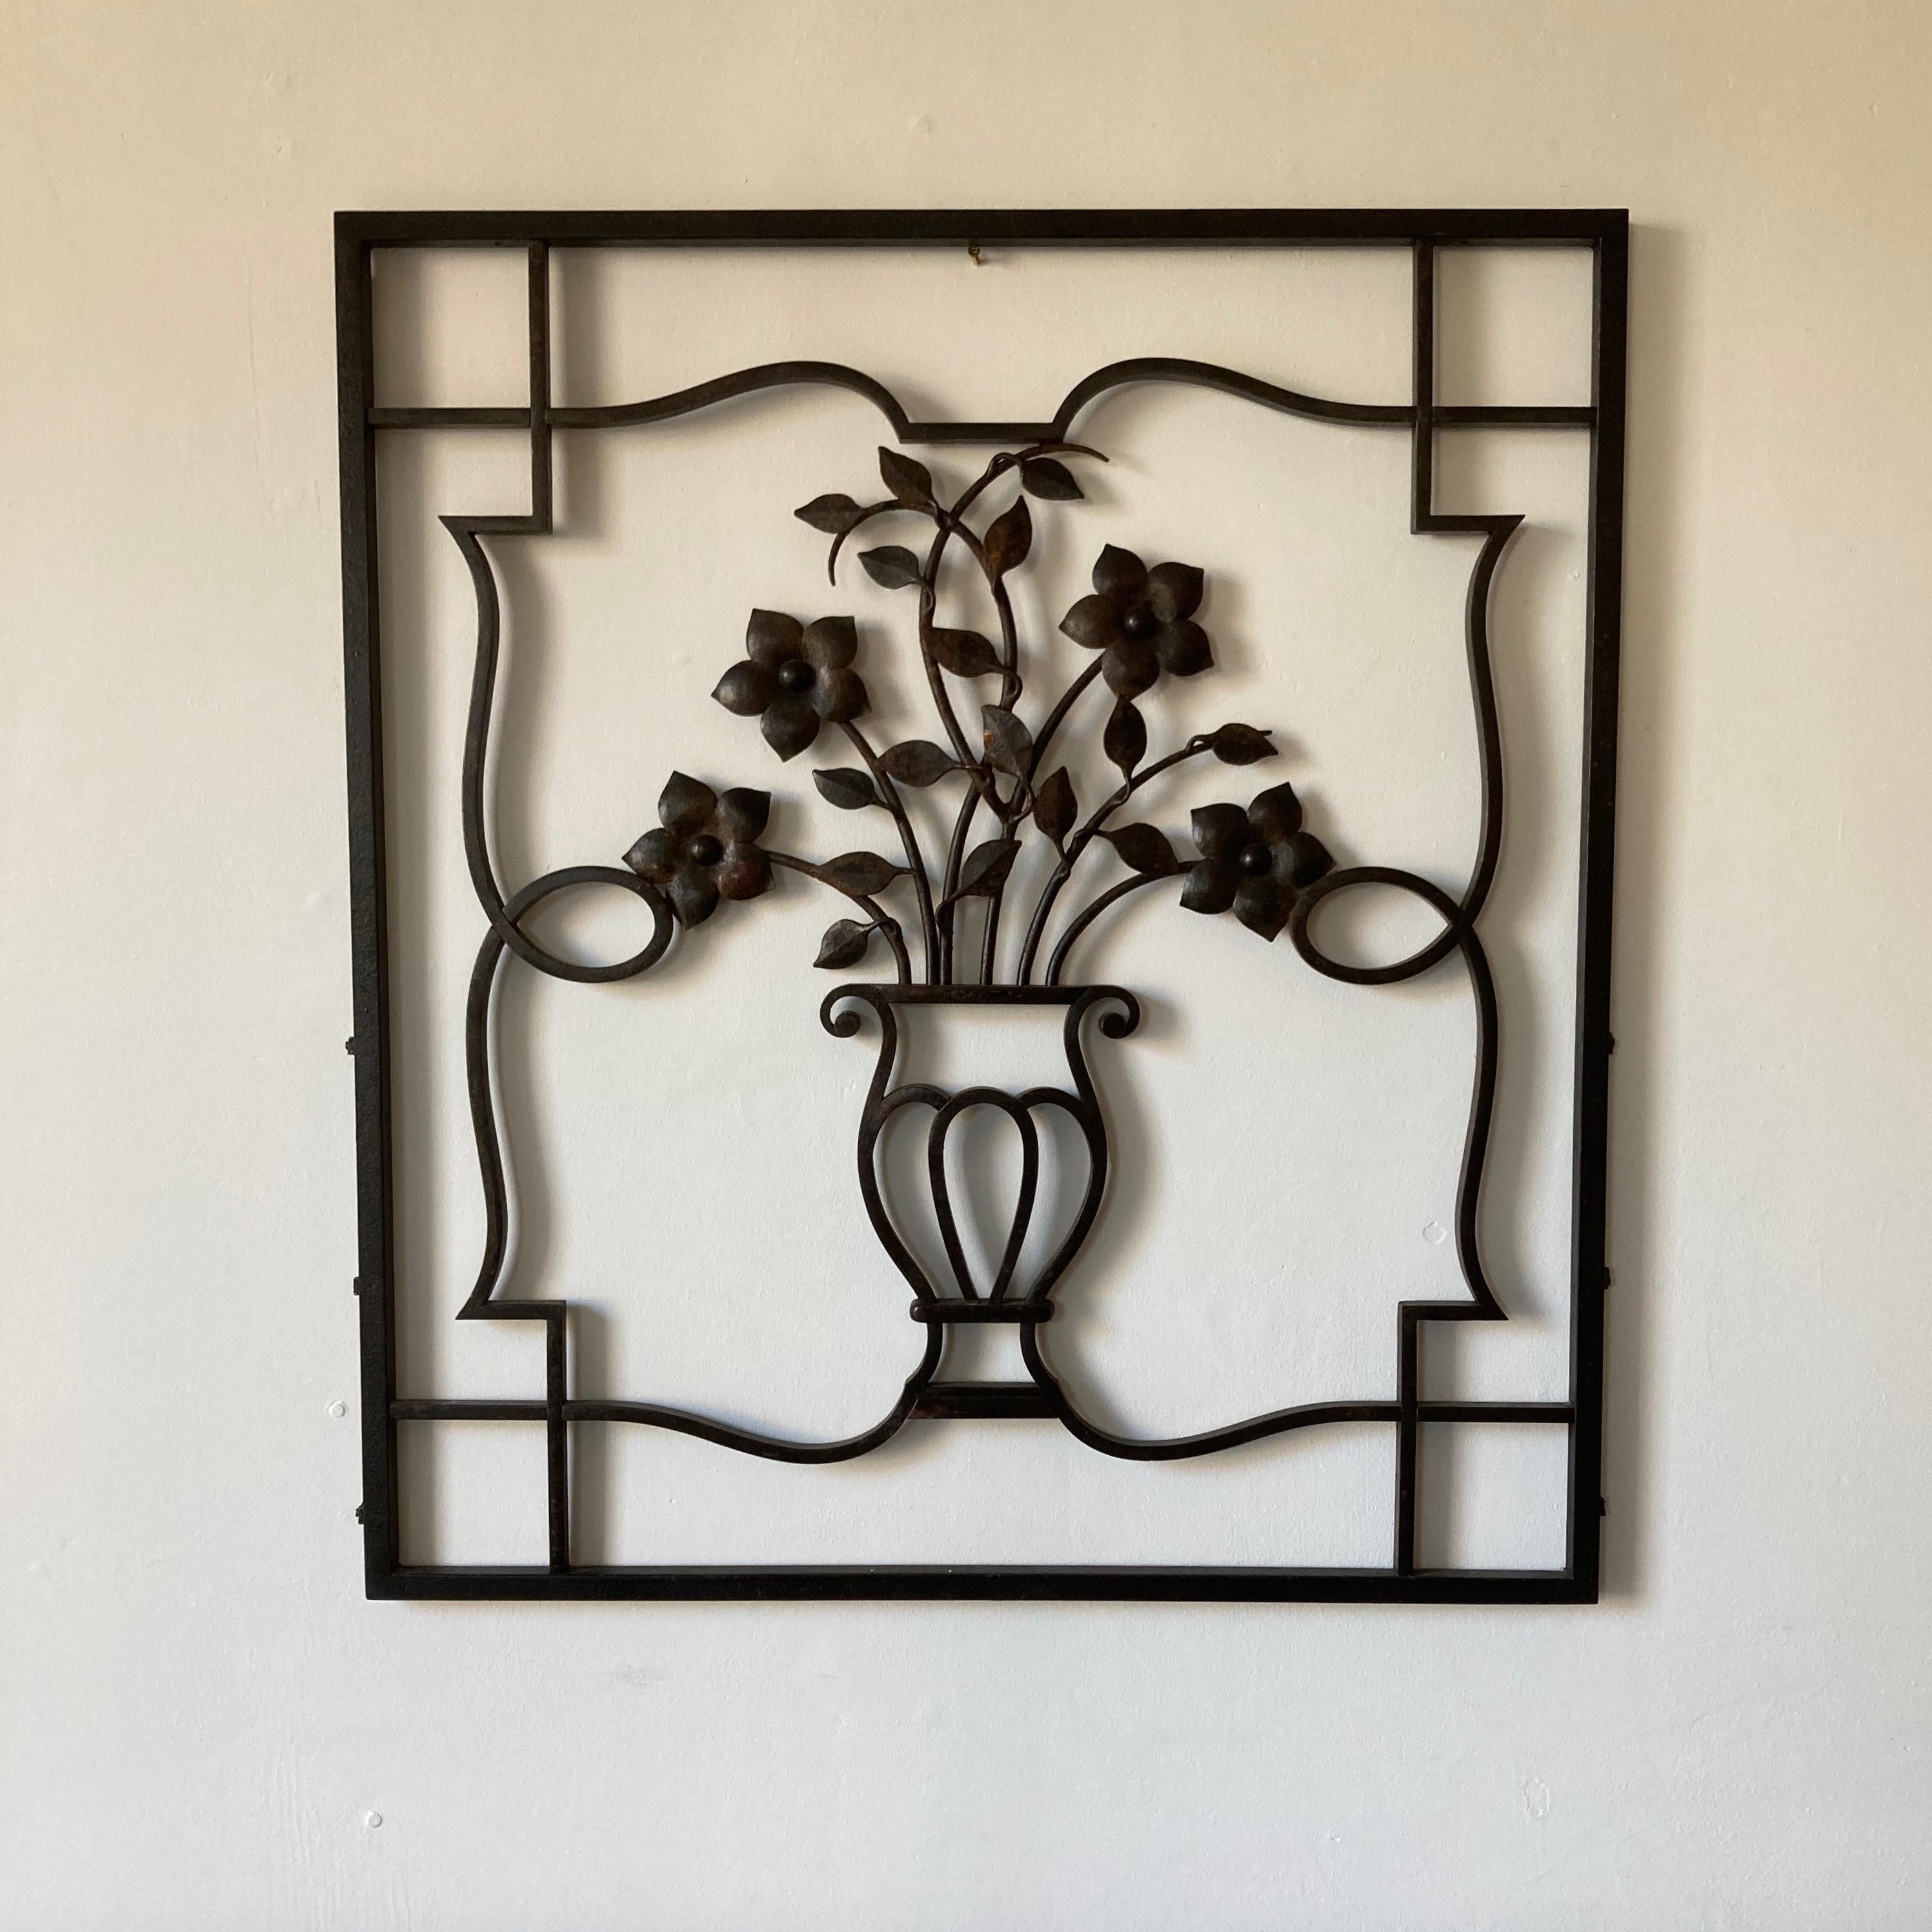 Decorative iron wall sculpture or applique, urn and floral motif. This wrought iron example of artisan craftsmanship. It makes a graphic, but soft statement.